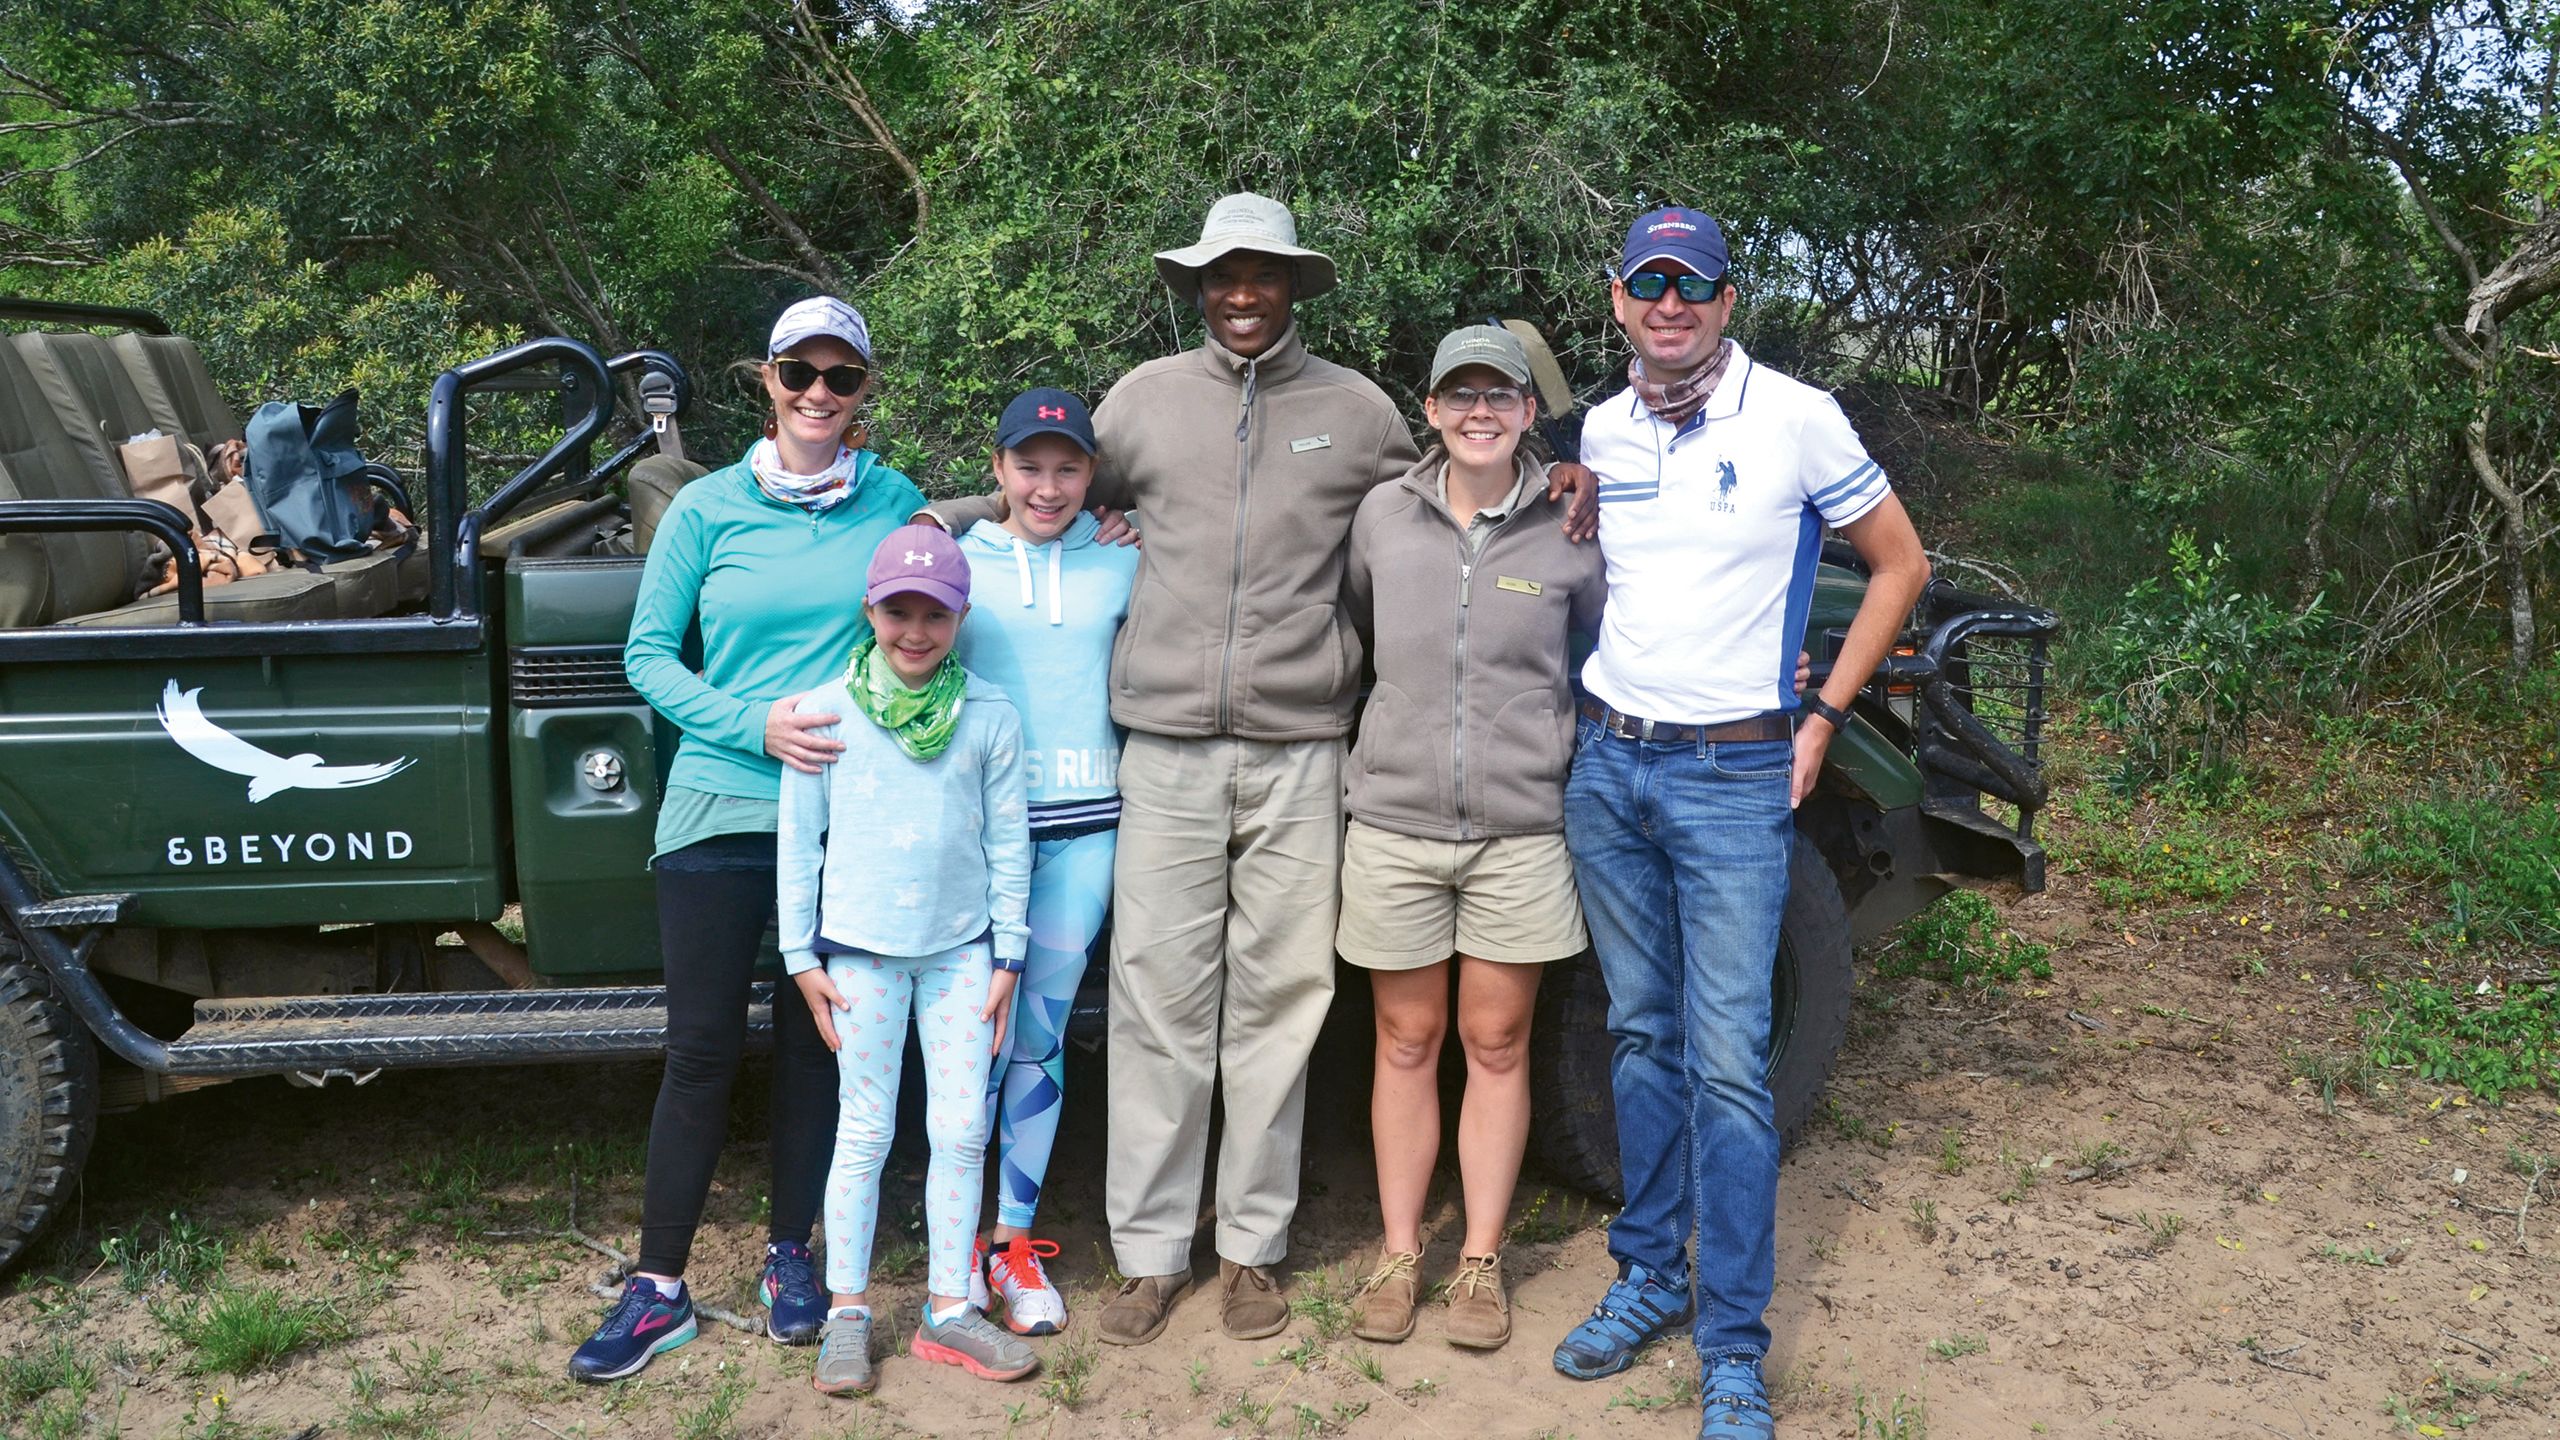 Murray Gardiner, CEO of luxury operator Giltedge Africa, far right, on a recent family trip. The new luxury travelers are bringing children along on their African adventures. In the past, luxury lodges tended to offer adults-only accommodations.